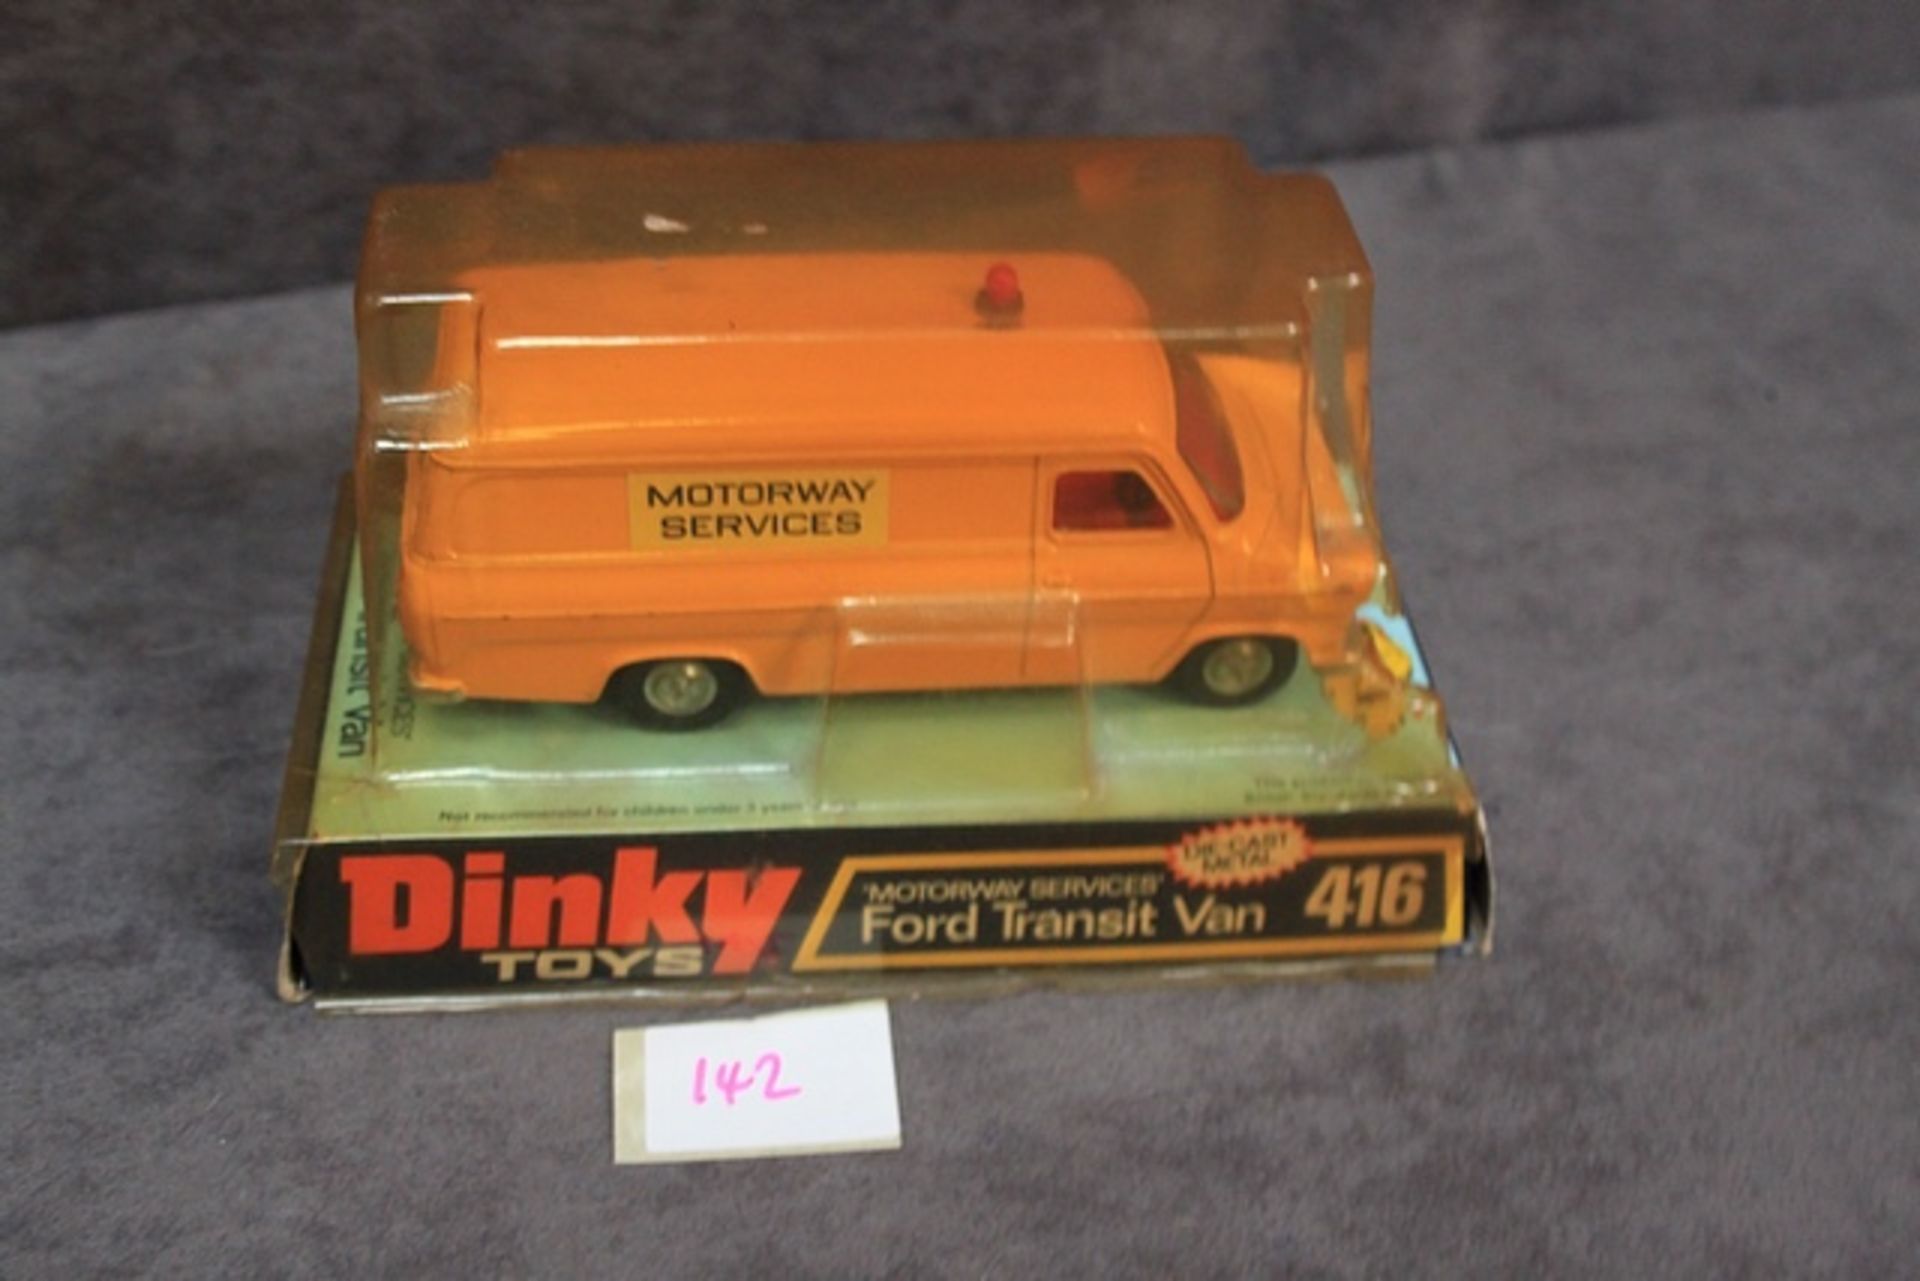 Mint Dinky Toys diecast #416 Motorway Services Ford Transit Van in original Bubble packaging (